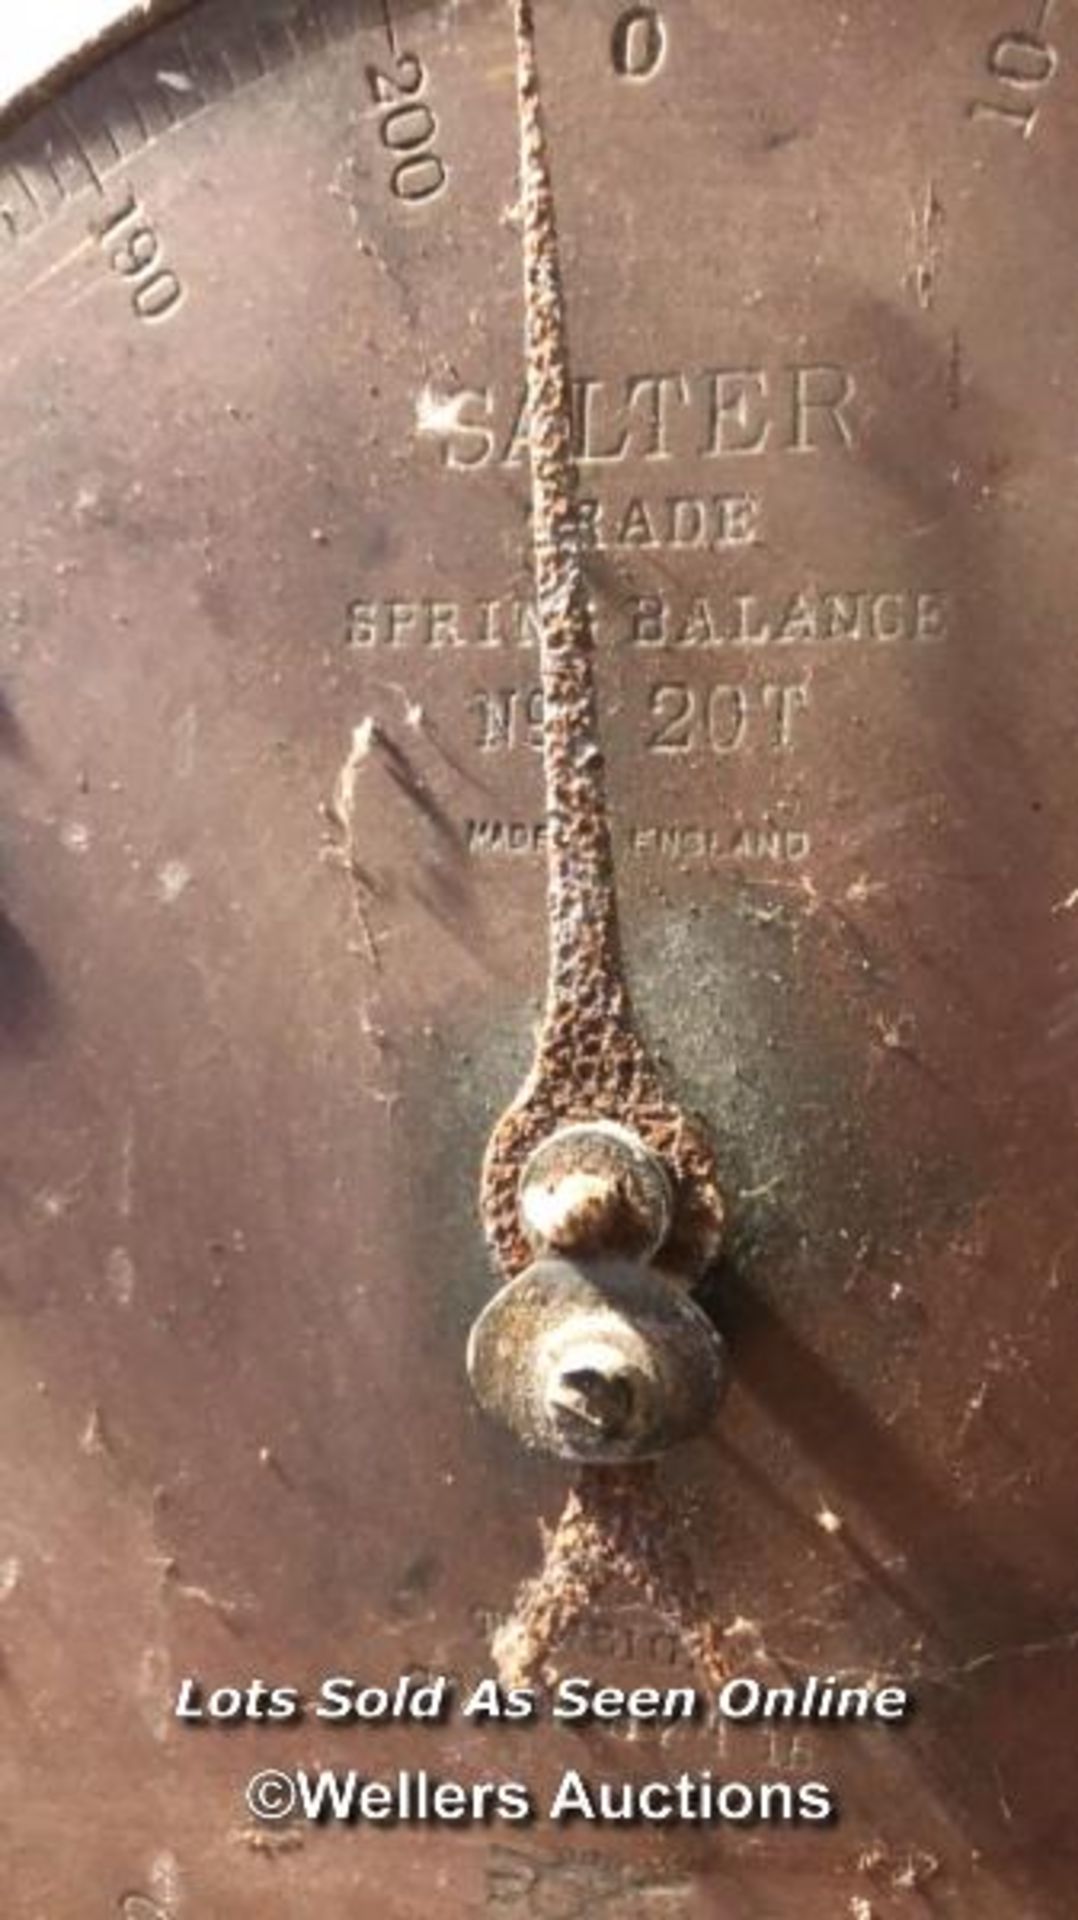 VINTAGE CARRIAGE LAMP, SALTER SCALES, PEAT SPADE AND SHOE STRETCHER - Image 4 of 5